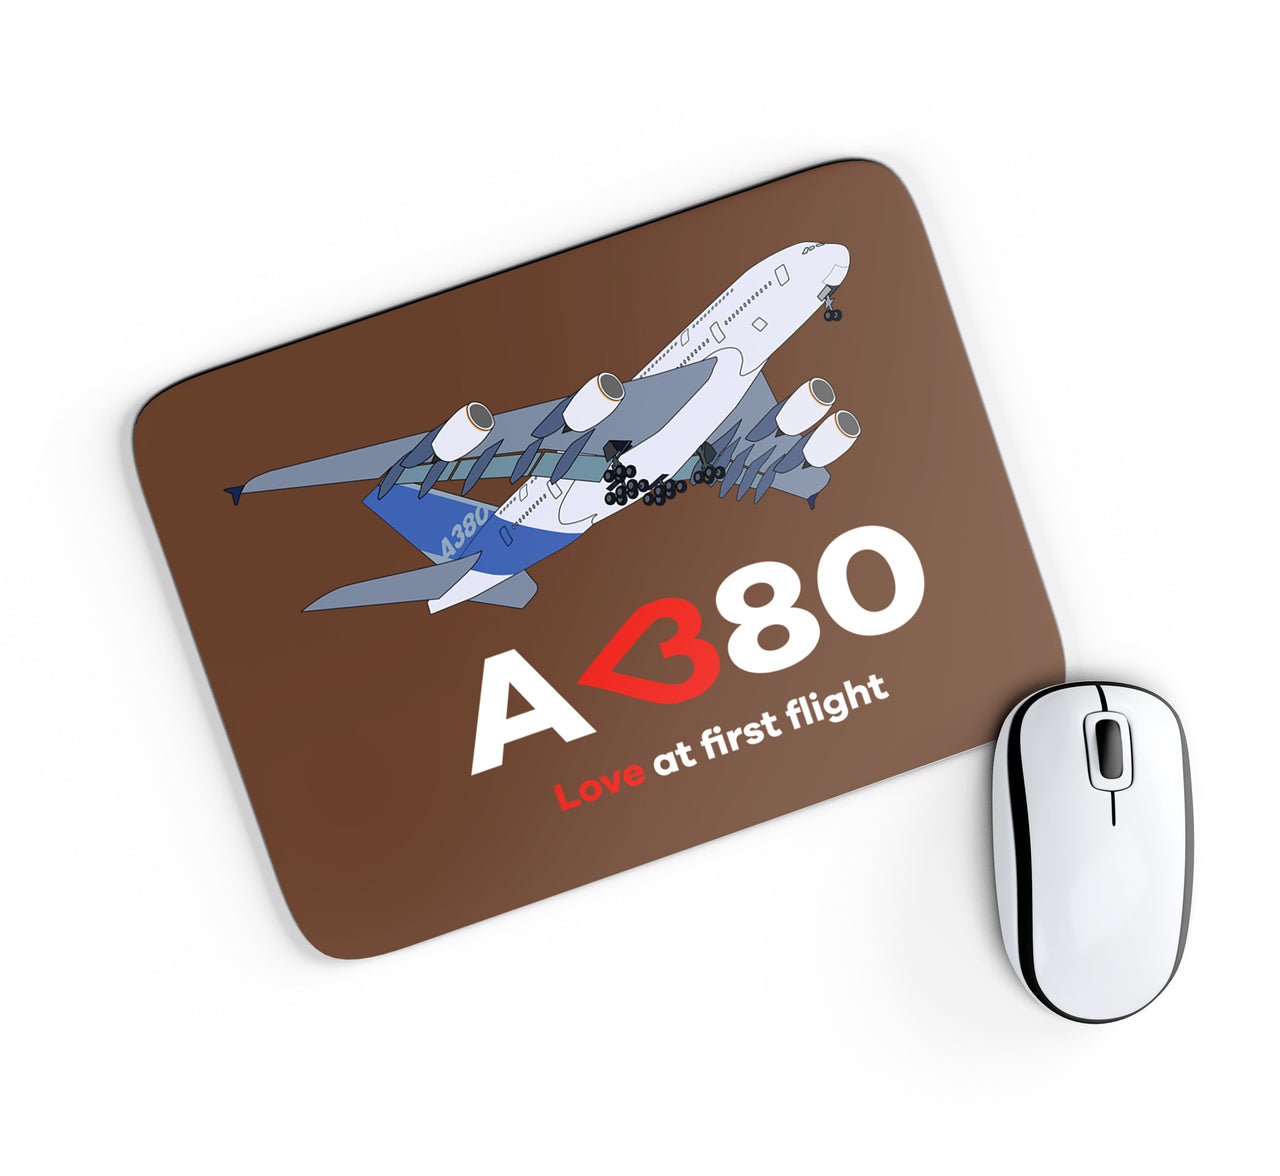 Airbus A380 Love at first flight Designed Mouse Pads